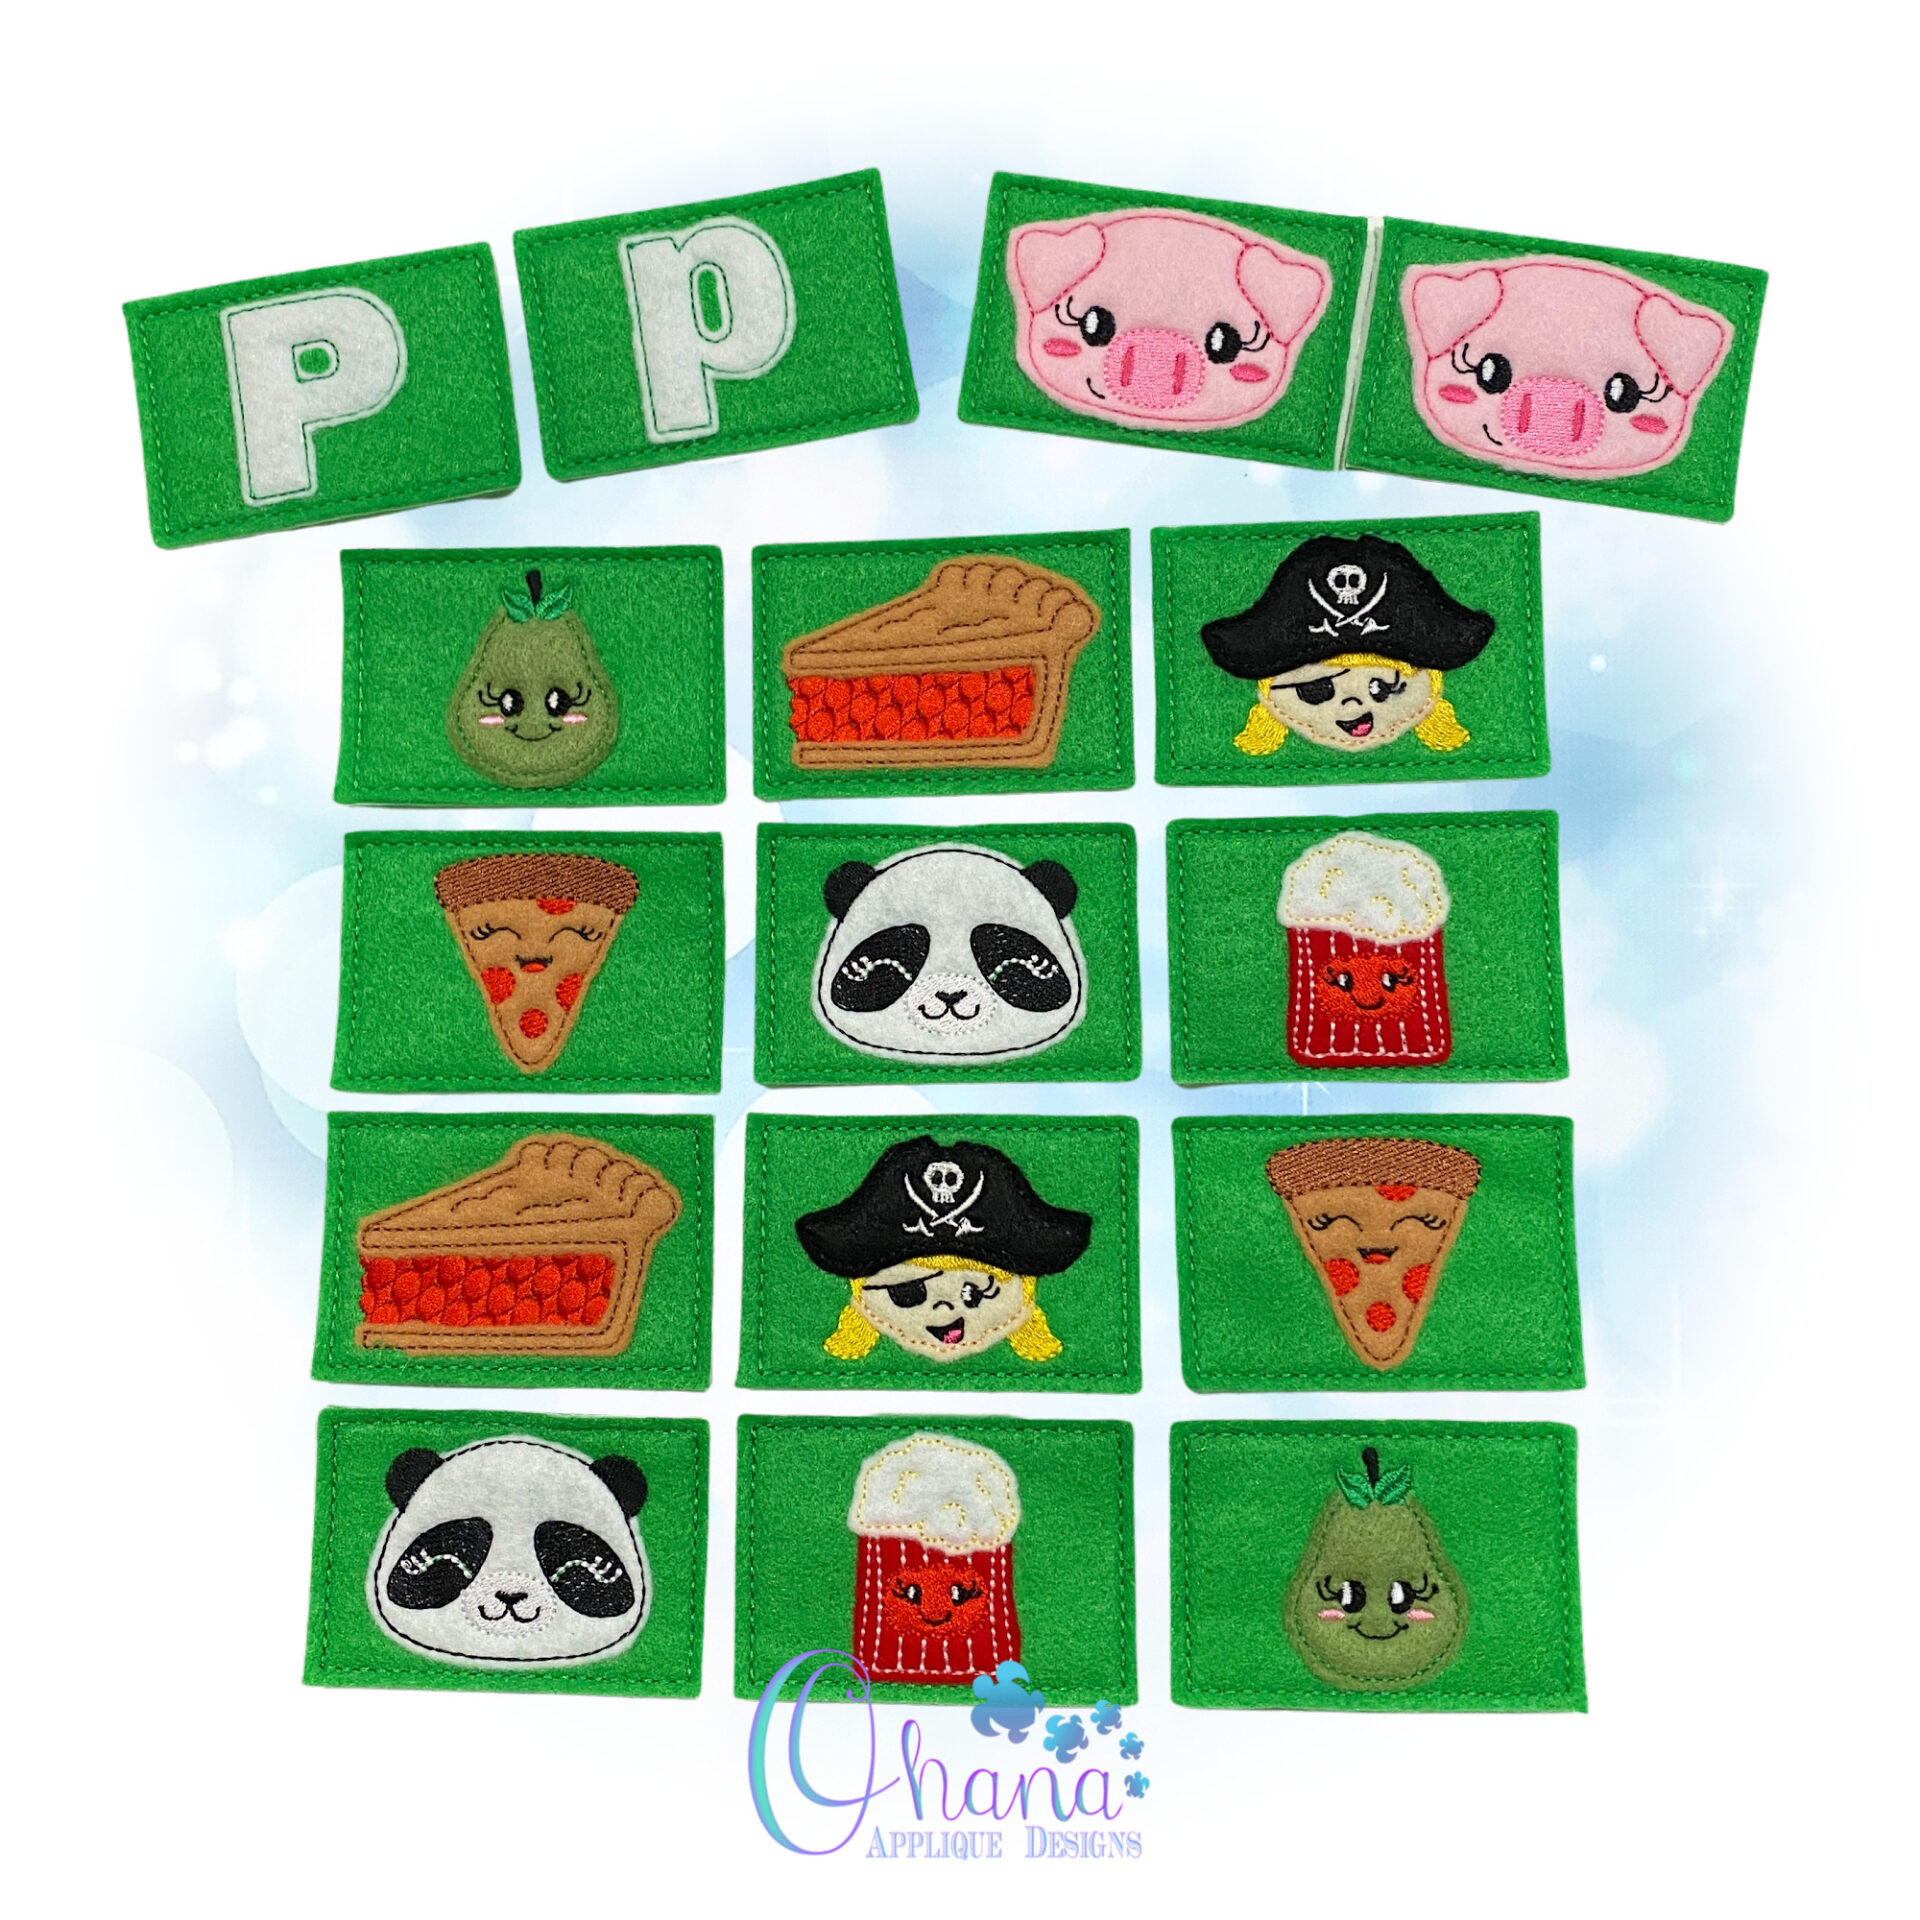 Letter P Matching Card